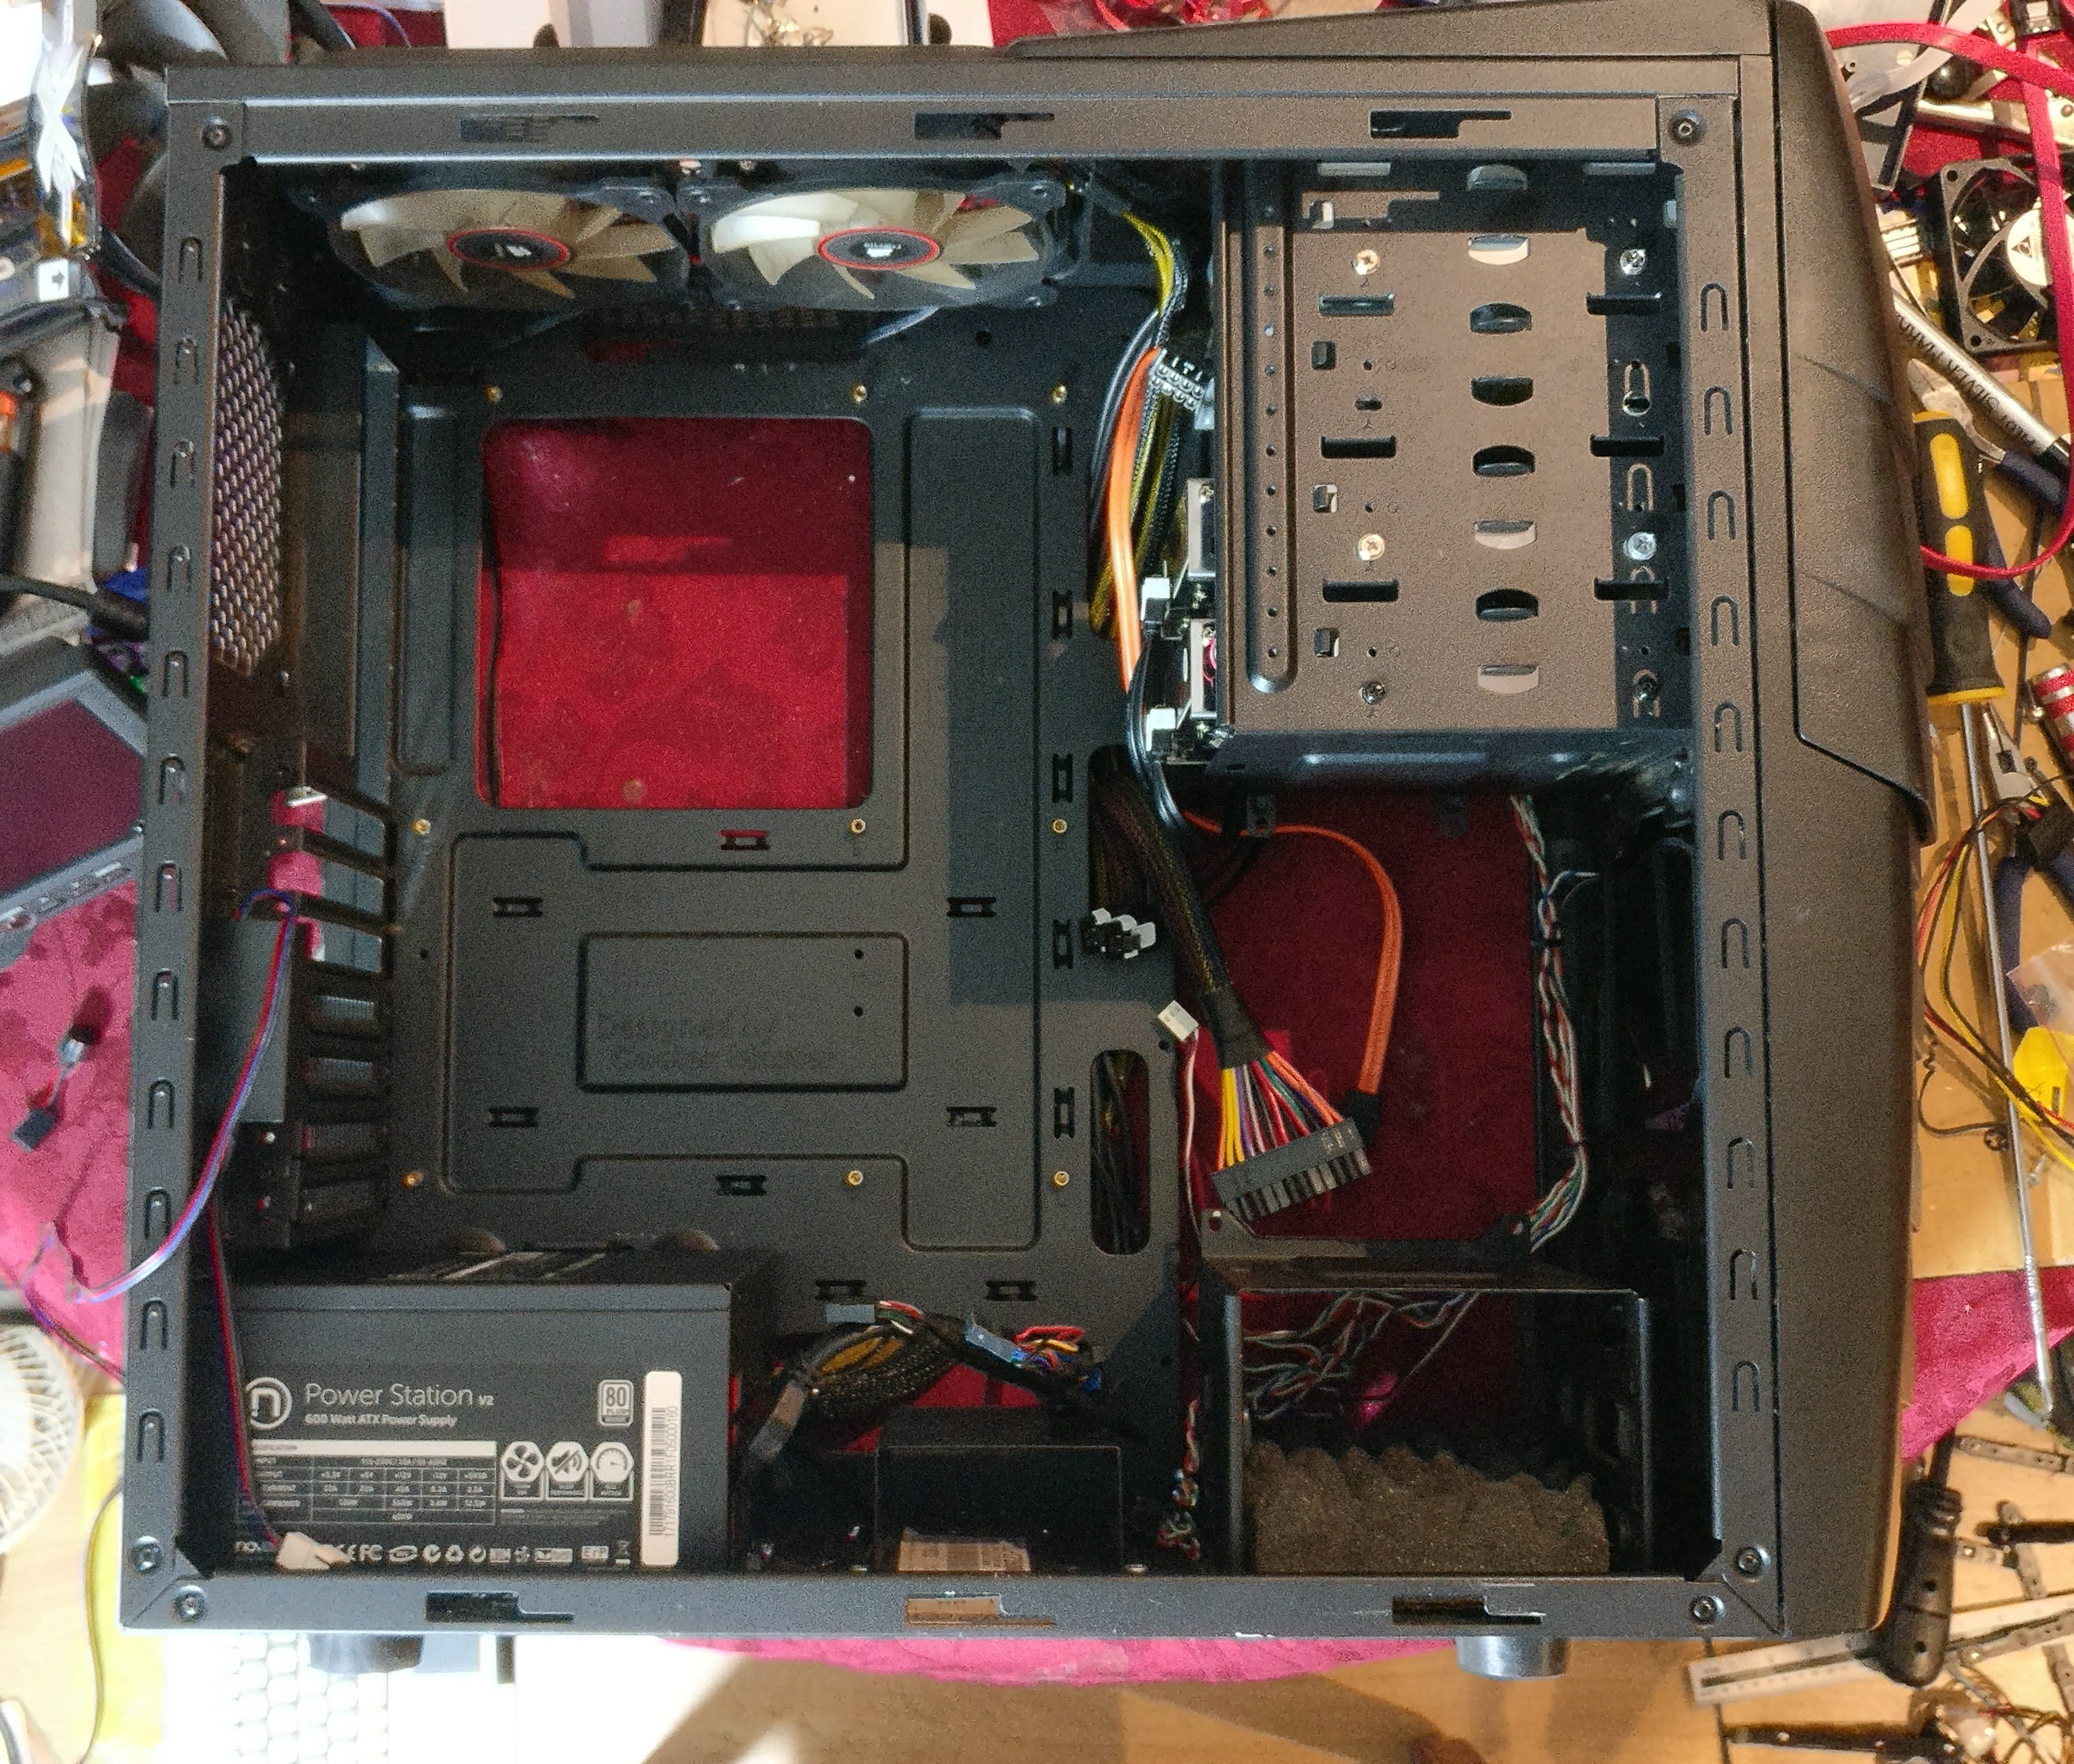 Cooler Master Enforcer, ready for the new innards